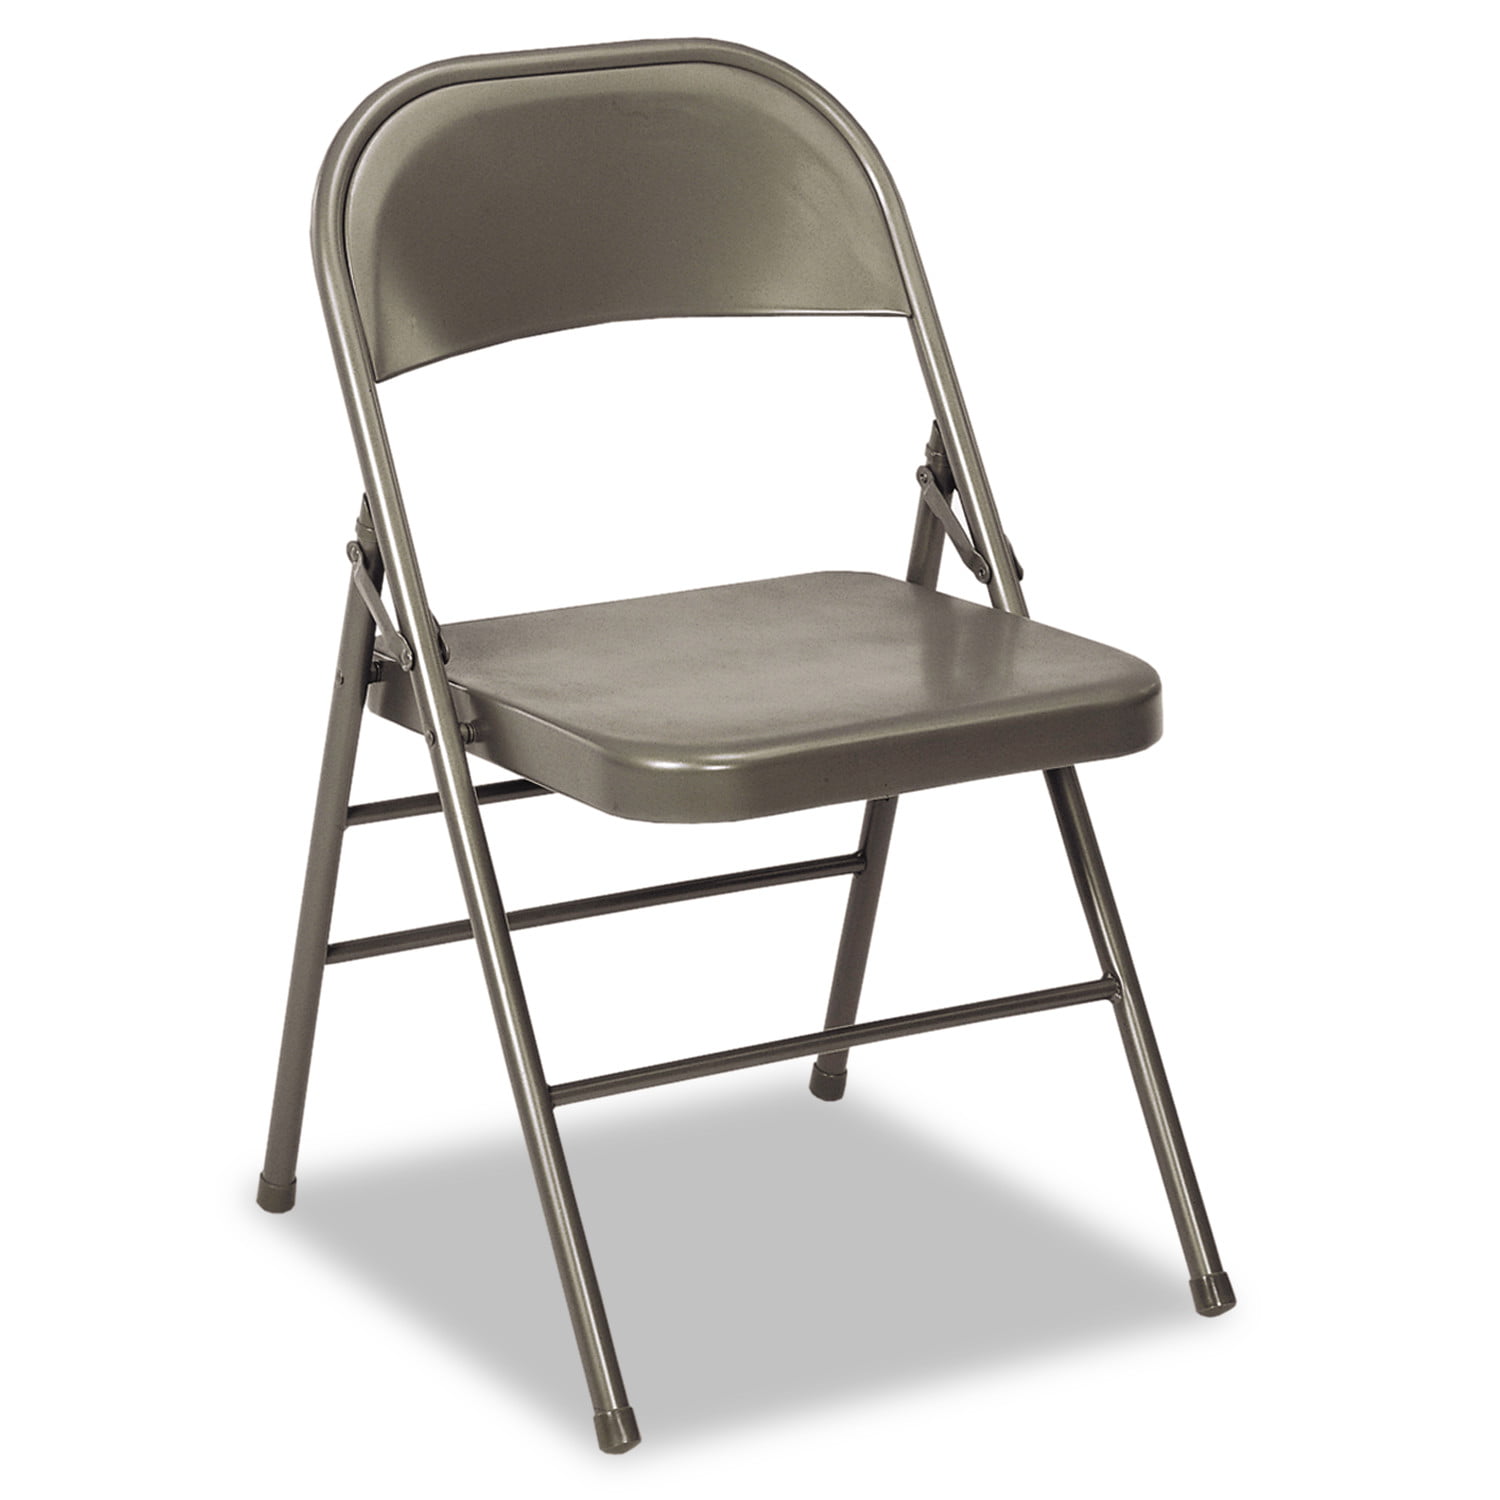 Cosco All Steel Folding Chair | escapeauthority.com